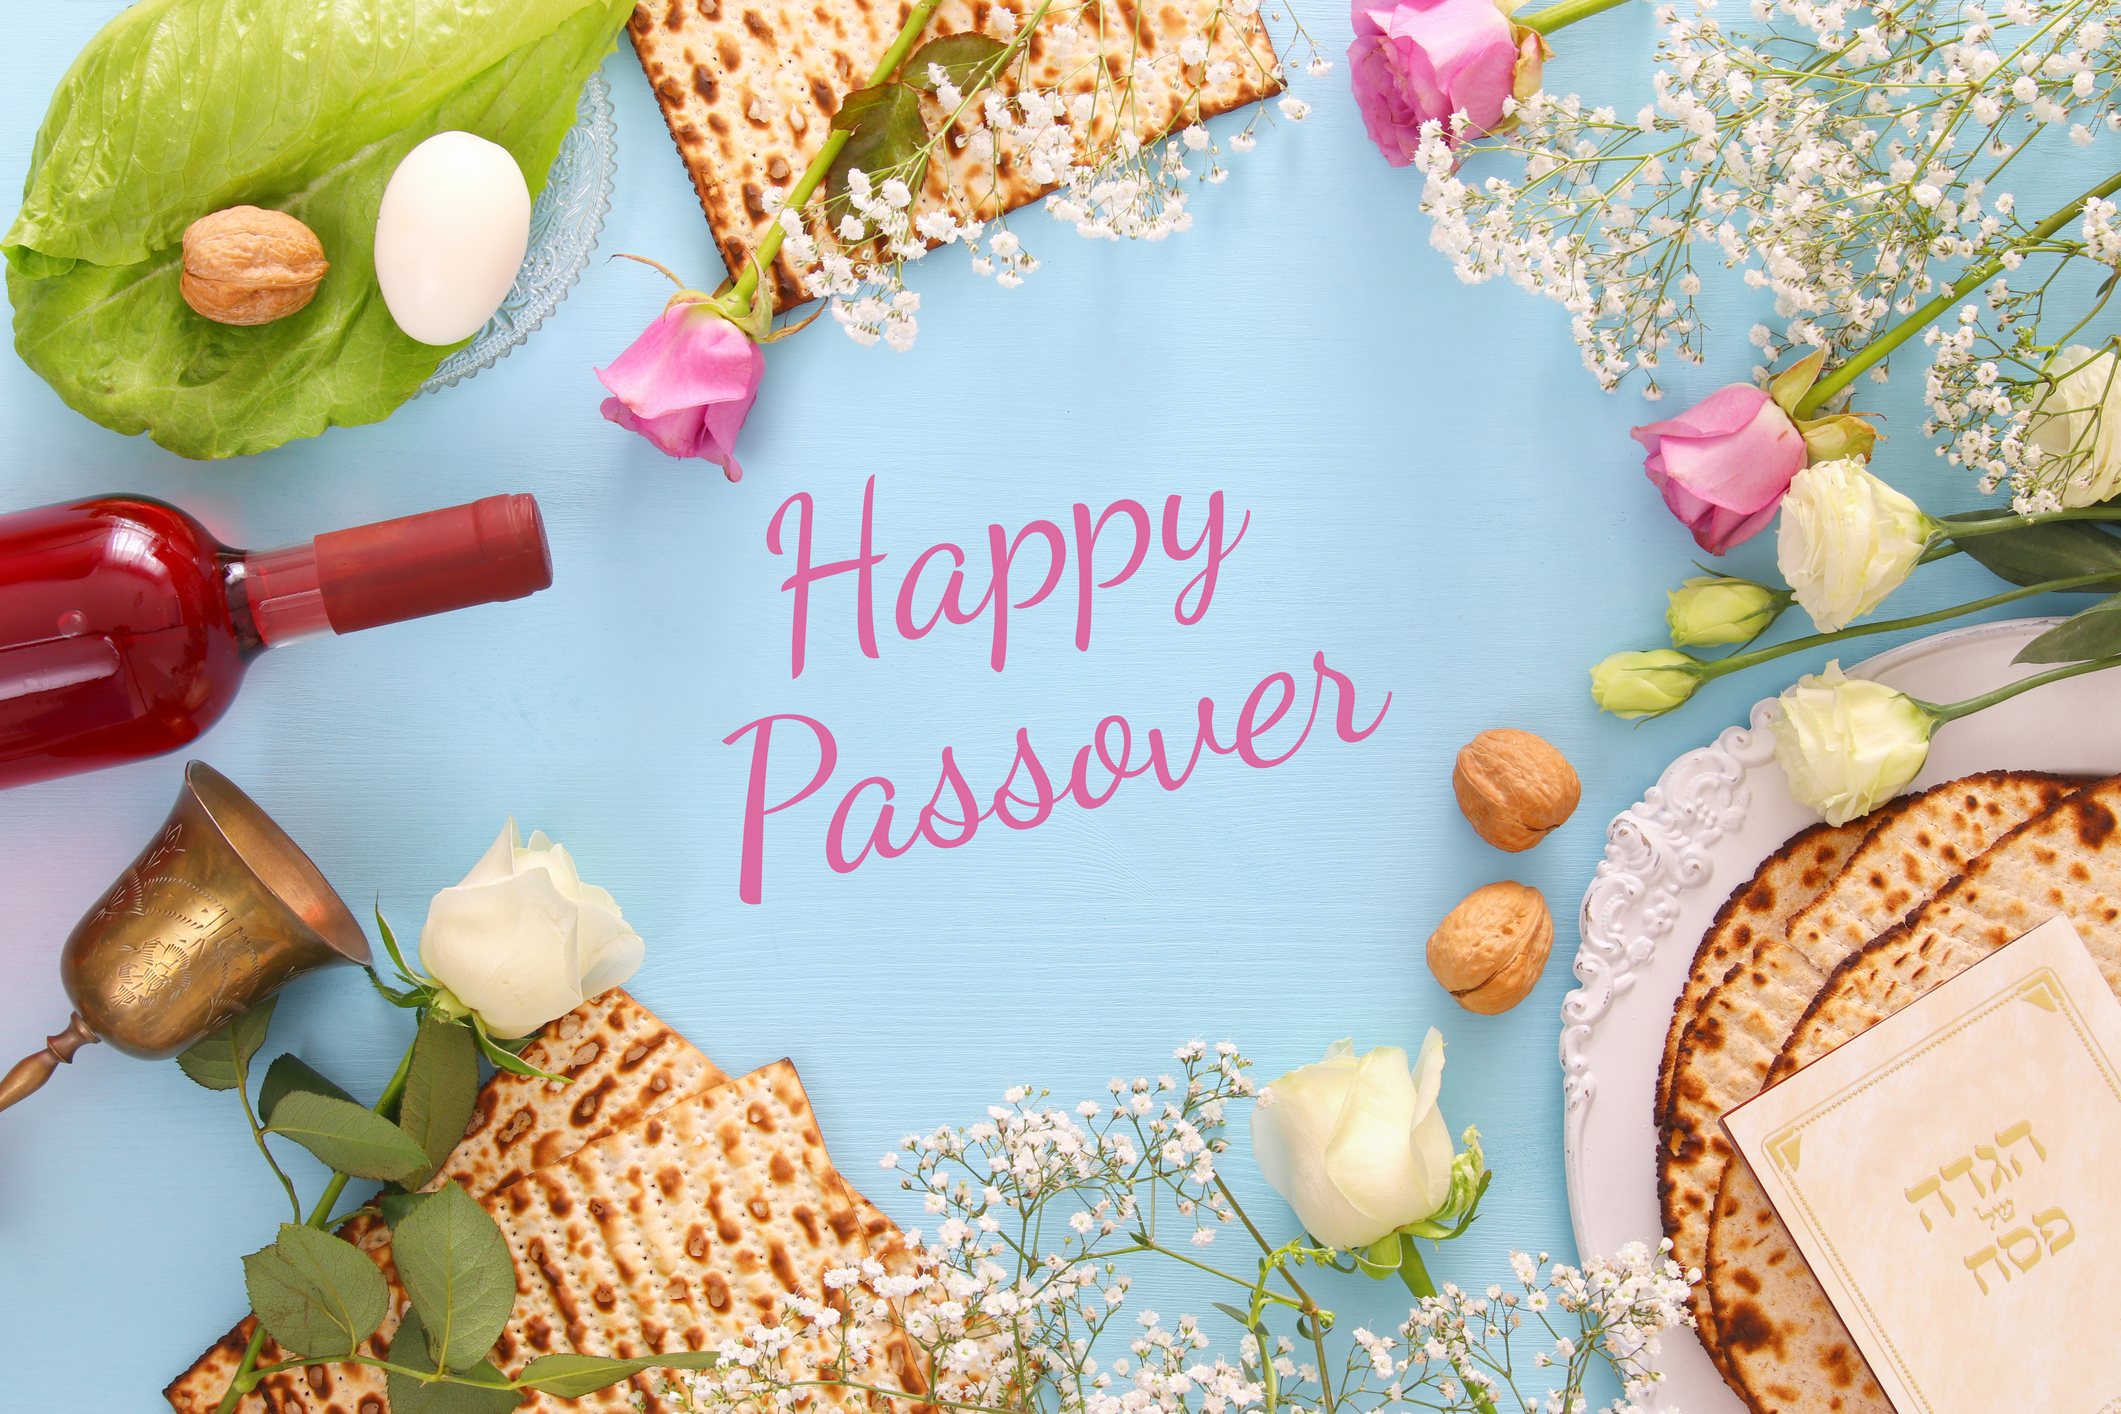 An Interfaith Celebration of Passover and Easter